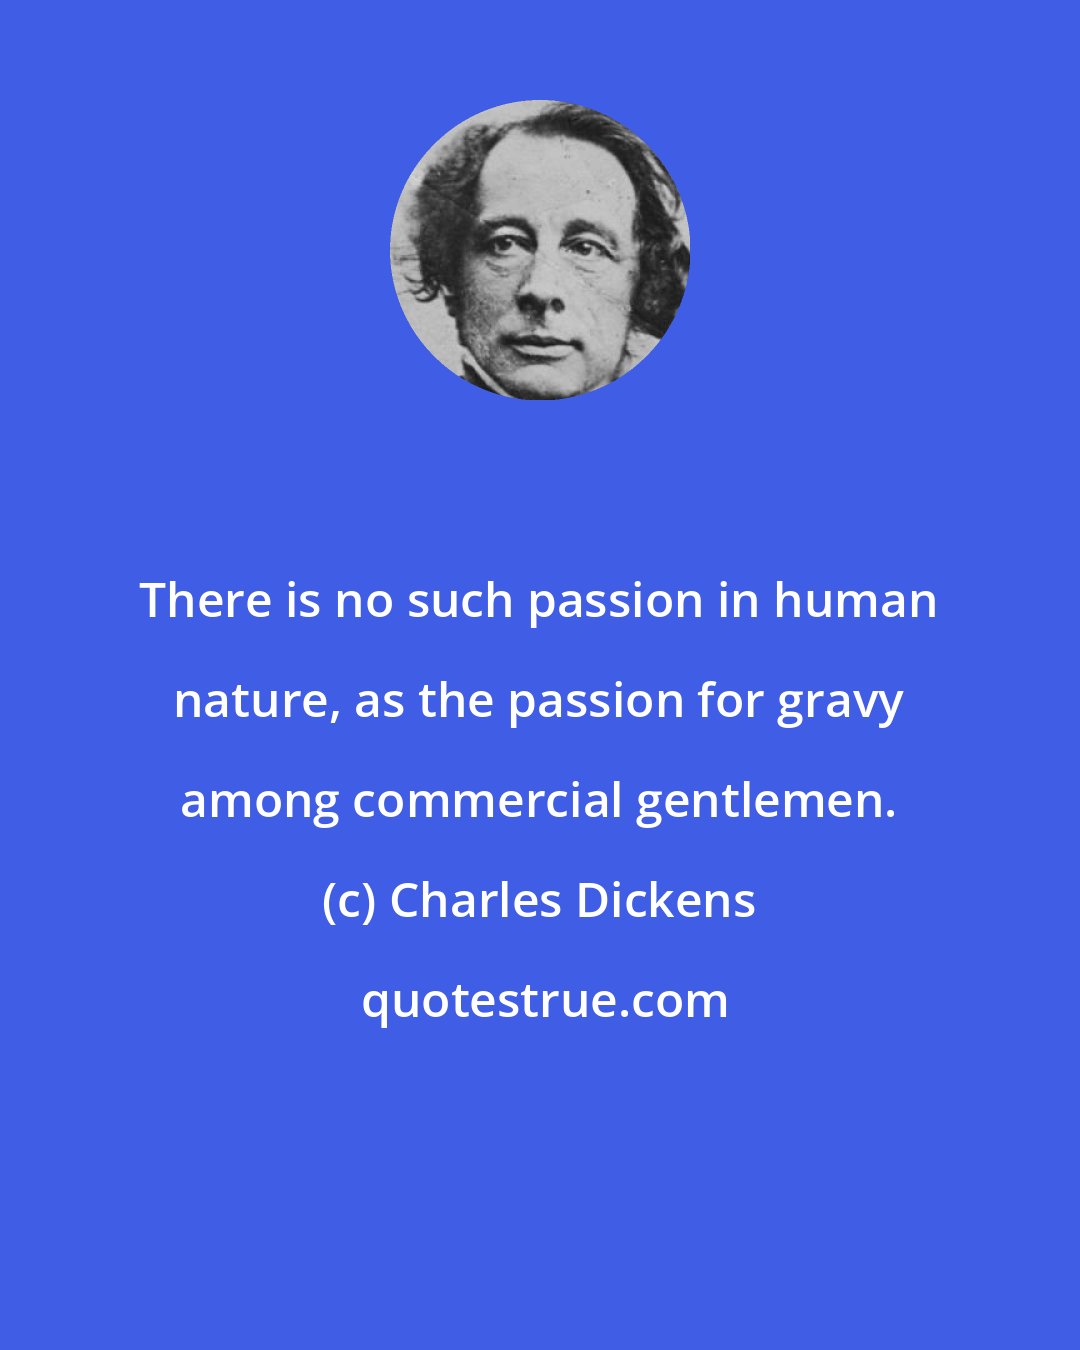 Charles Dickens: There is no such passion in human nature, as the passion for gravy among commercial gentlemen.